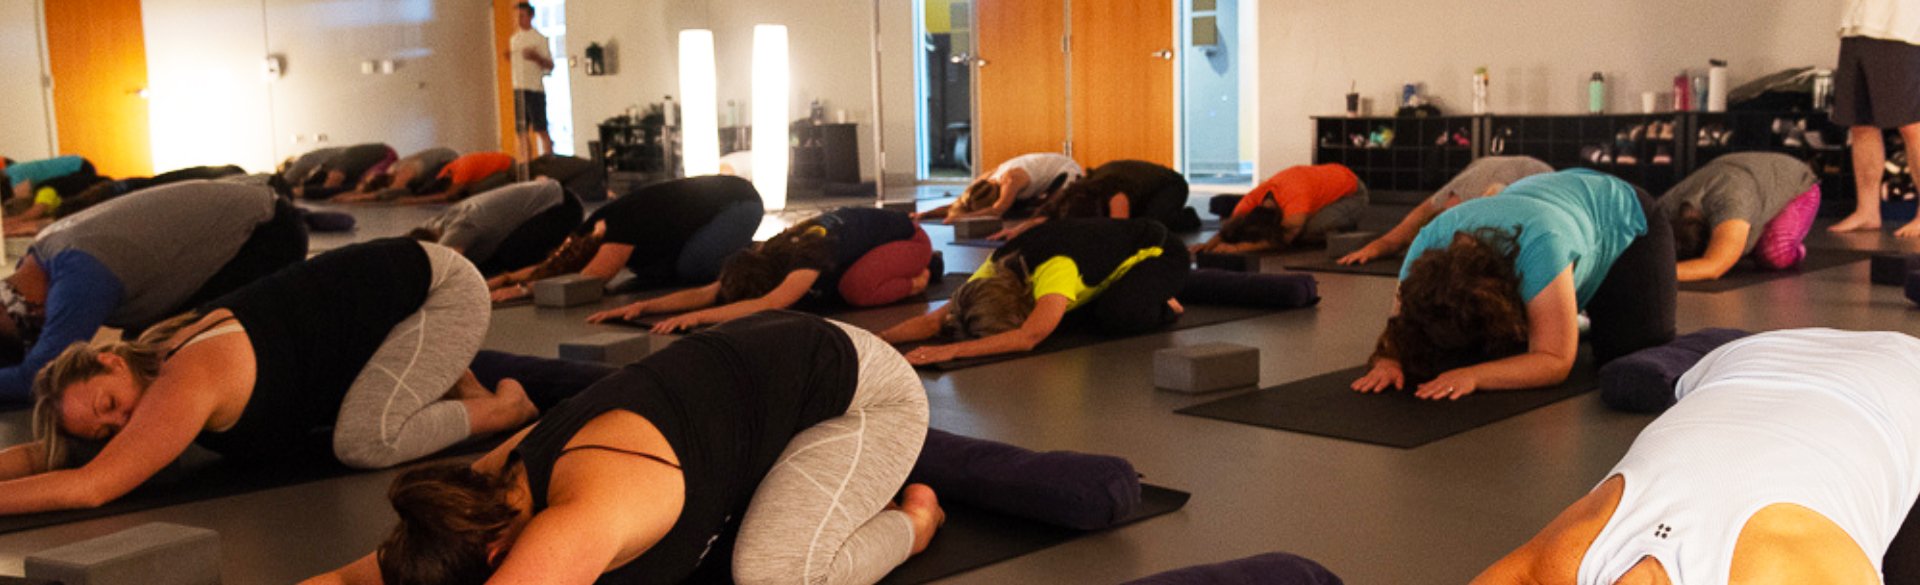 A large class in relaxed yoga pose